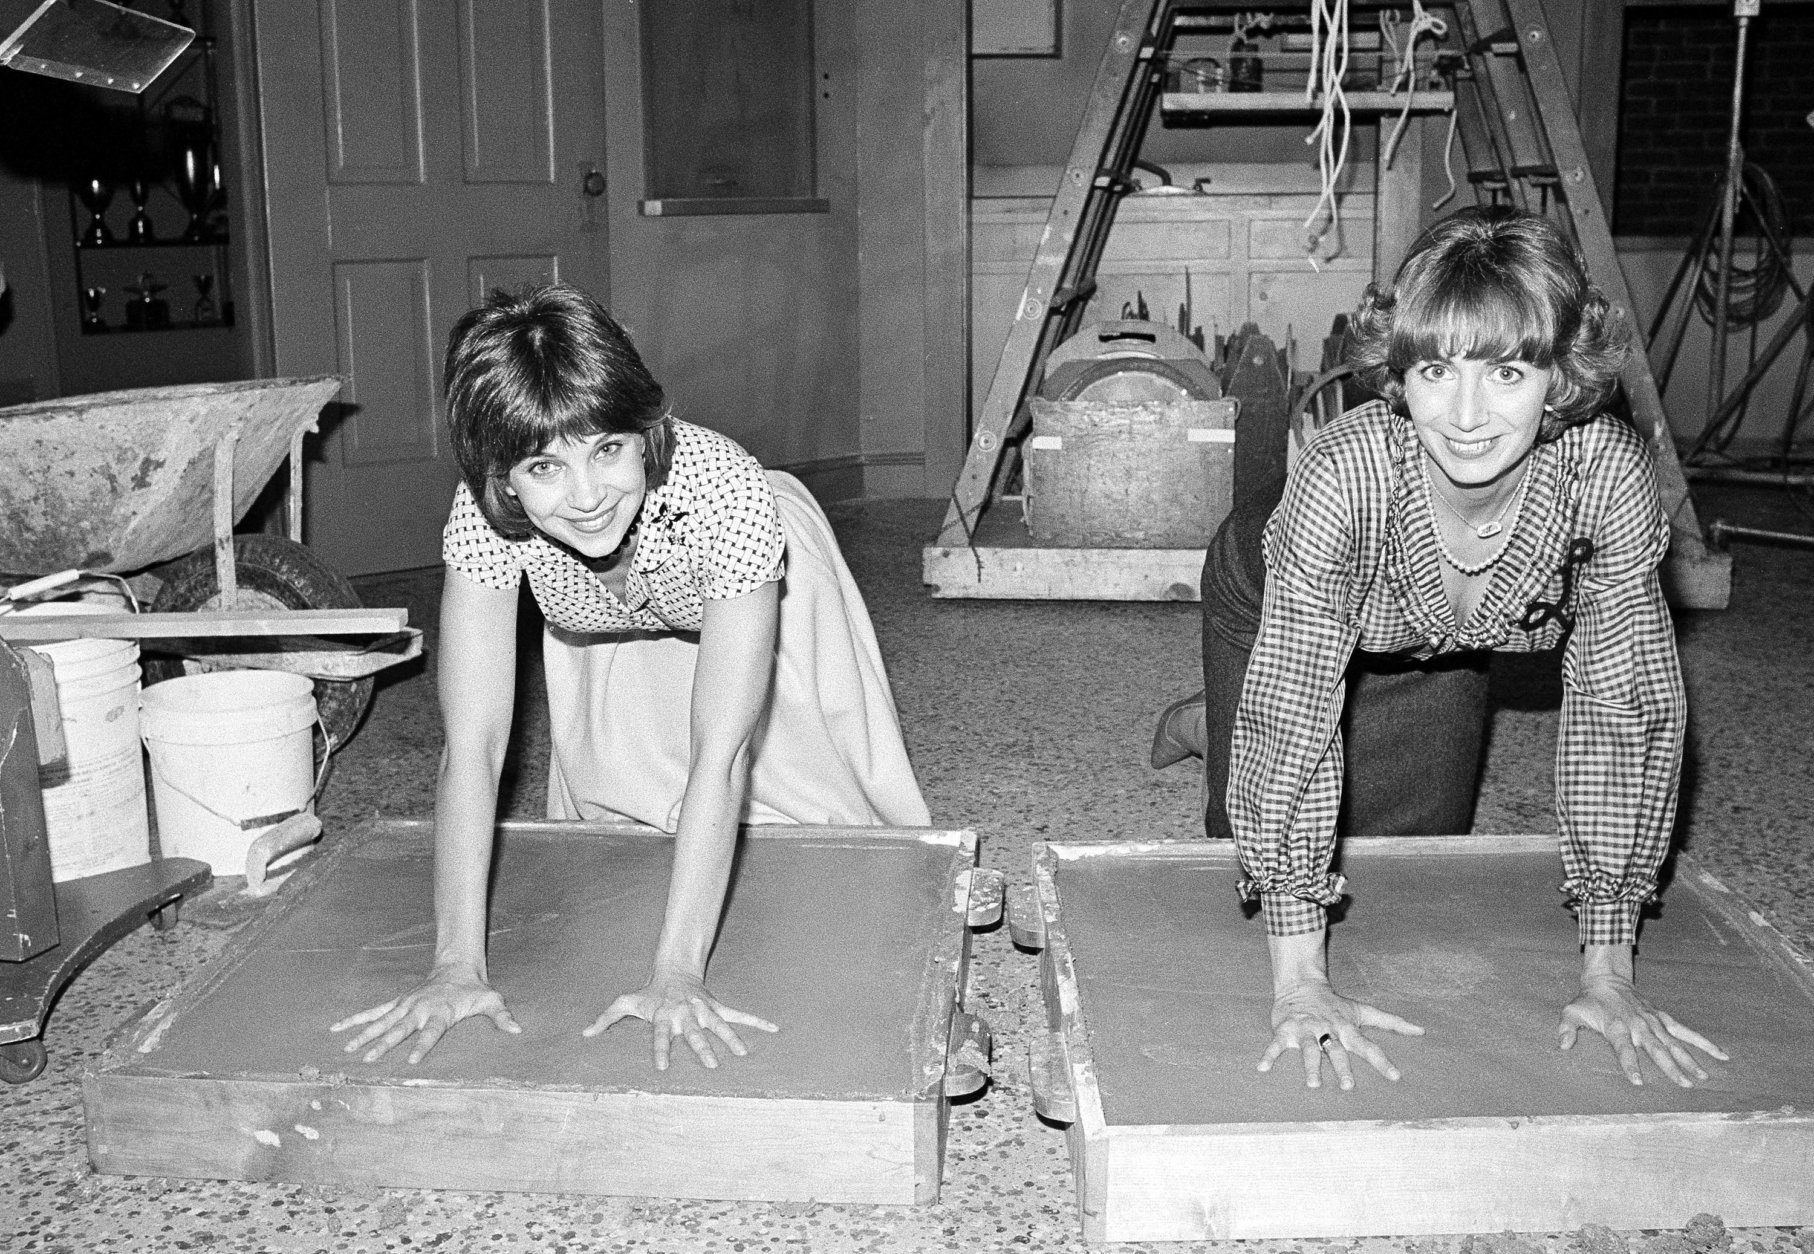 FILE - In this , Nov. 14, 1979, file photo taken by Associated Press photographer Lennox McLendon, shows actresses Cindy Williams, left, and Penny Marshall, stars of the ABC-TV comedy series "Laverne and Shirley," make an impression in cement after the taping of their show in Los Angeles. Lennox "Red" McLendon, a globe-trotting photographer who chronicled everything from the Vietnam War to the Academy Awards during a long career with the U.S. Navy and The Associated Press, has died at 74. McLendon died Oct. 24, 2017 in Las Vegas, according to his family. (AP Photo/Lennox McLendon, File)